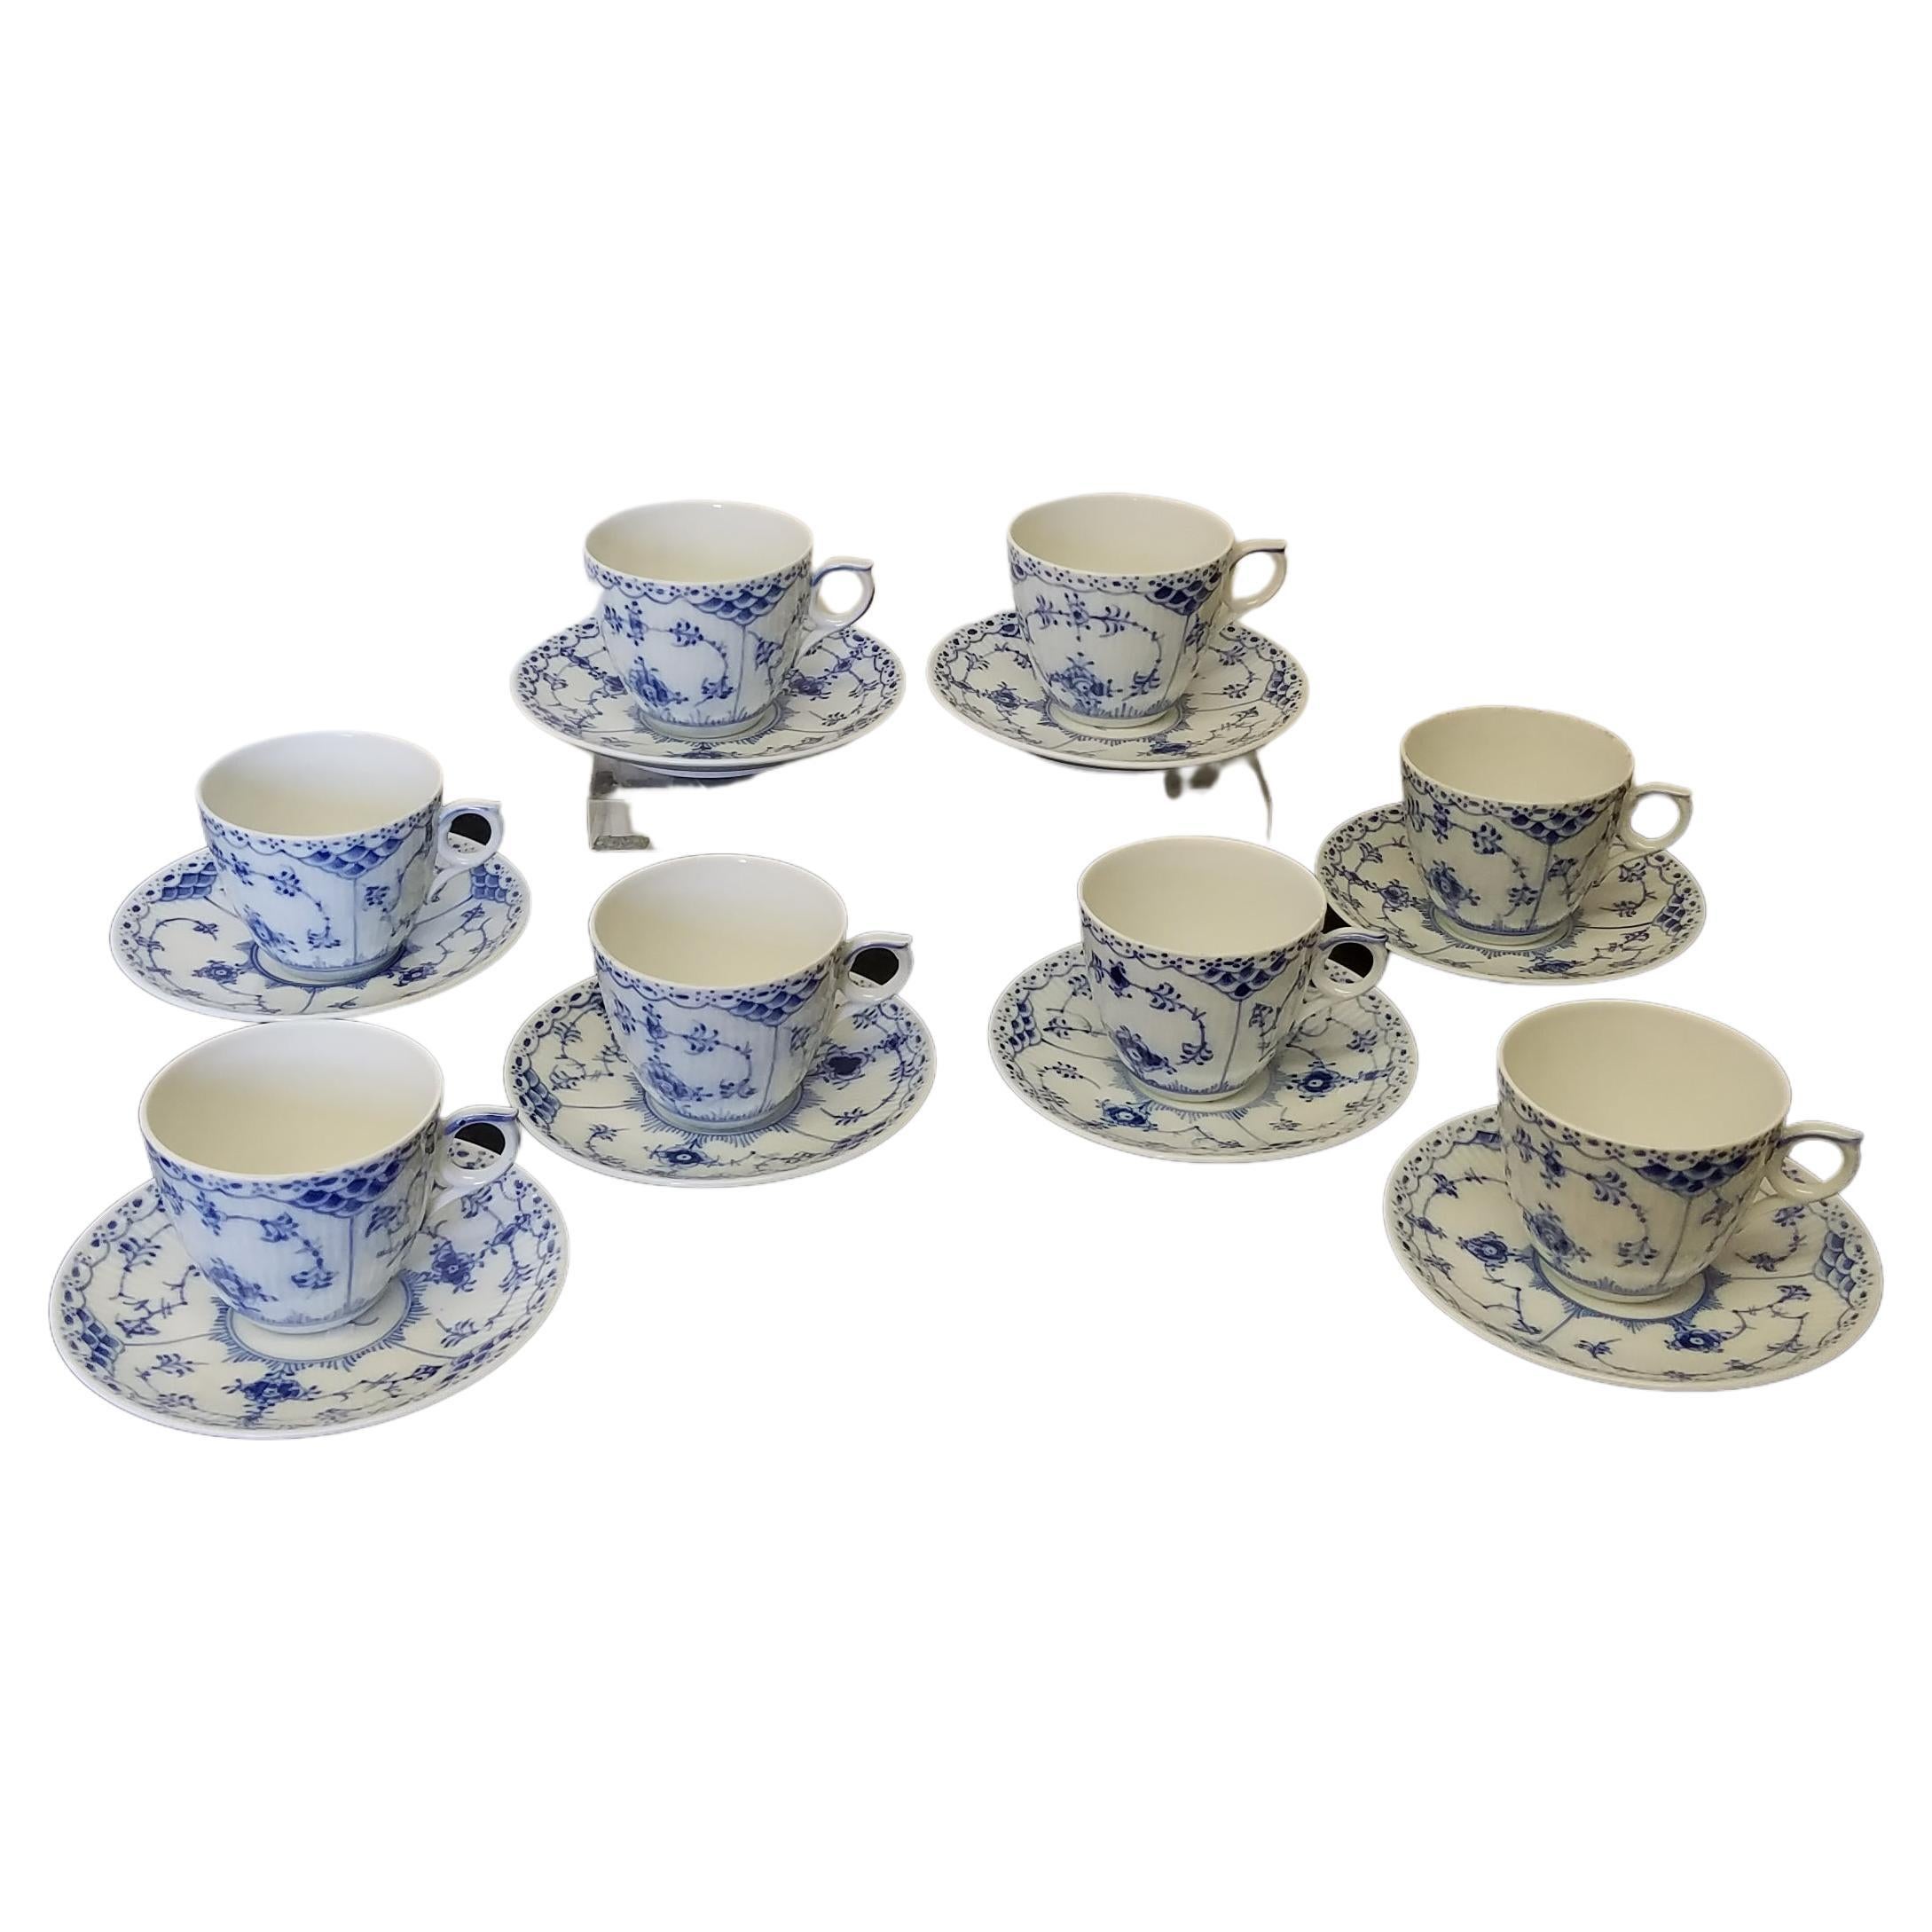 Aozita Porcelain Cappuccino Cups & Espresso Cups and Saucers with Espresso Spoons Demitasse Cups 2.5/6 Ounce Espresso Cups for Latte Cafe Mocha and Tea Protective packaging 